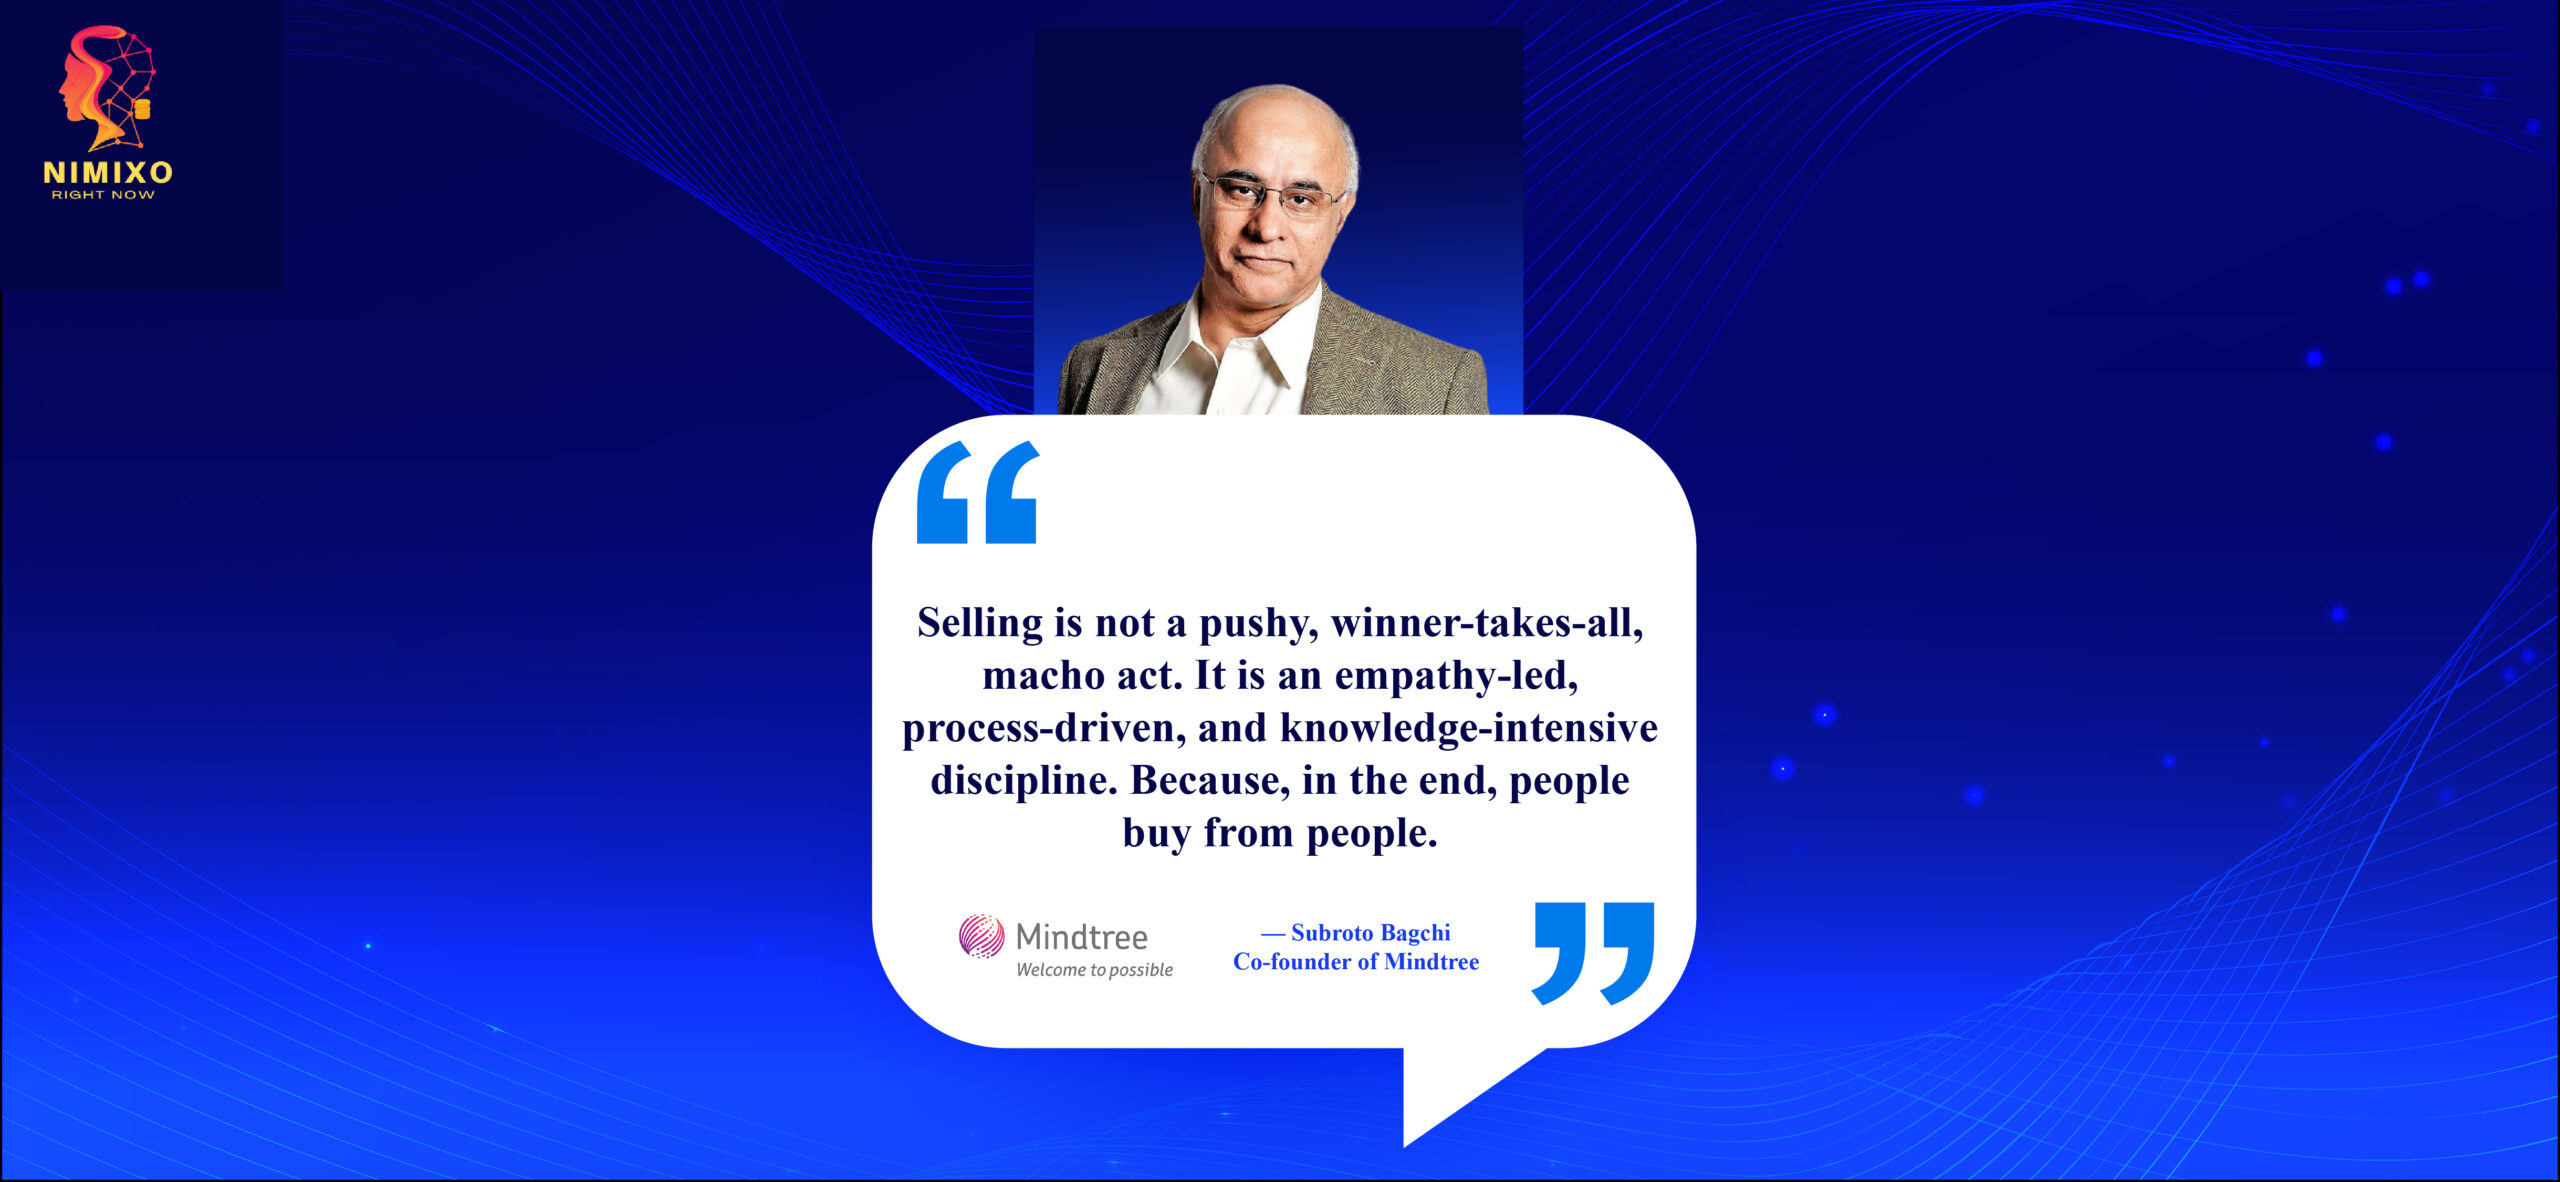 The Uncommon Path to Sales Success: Nurturing Genuine Relationships. Selling is not a pushy, winner-takes-all, macho act. It is an empathy-led, process-driven, and knowledge-intensive discipline. Because, in the end, people buy from people. -Subroto Bagchi, Co-founder of Mindtree